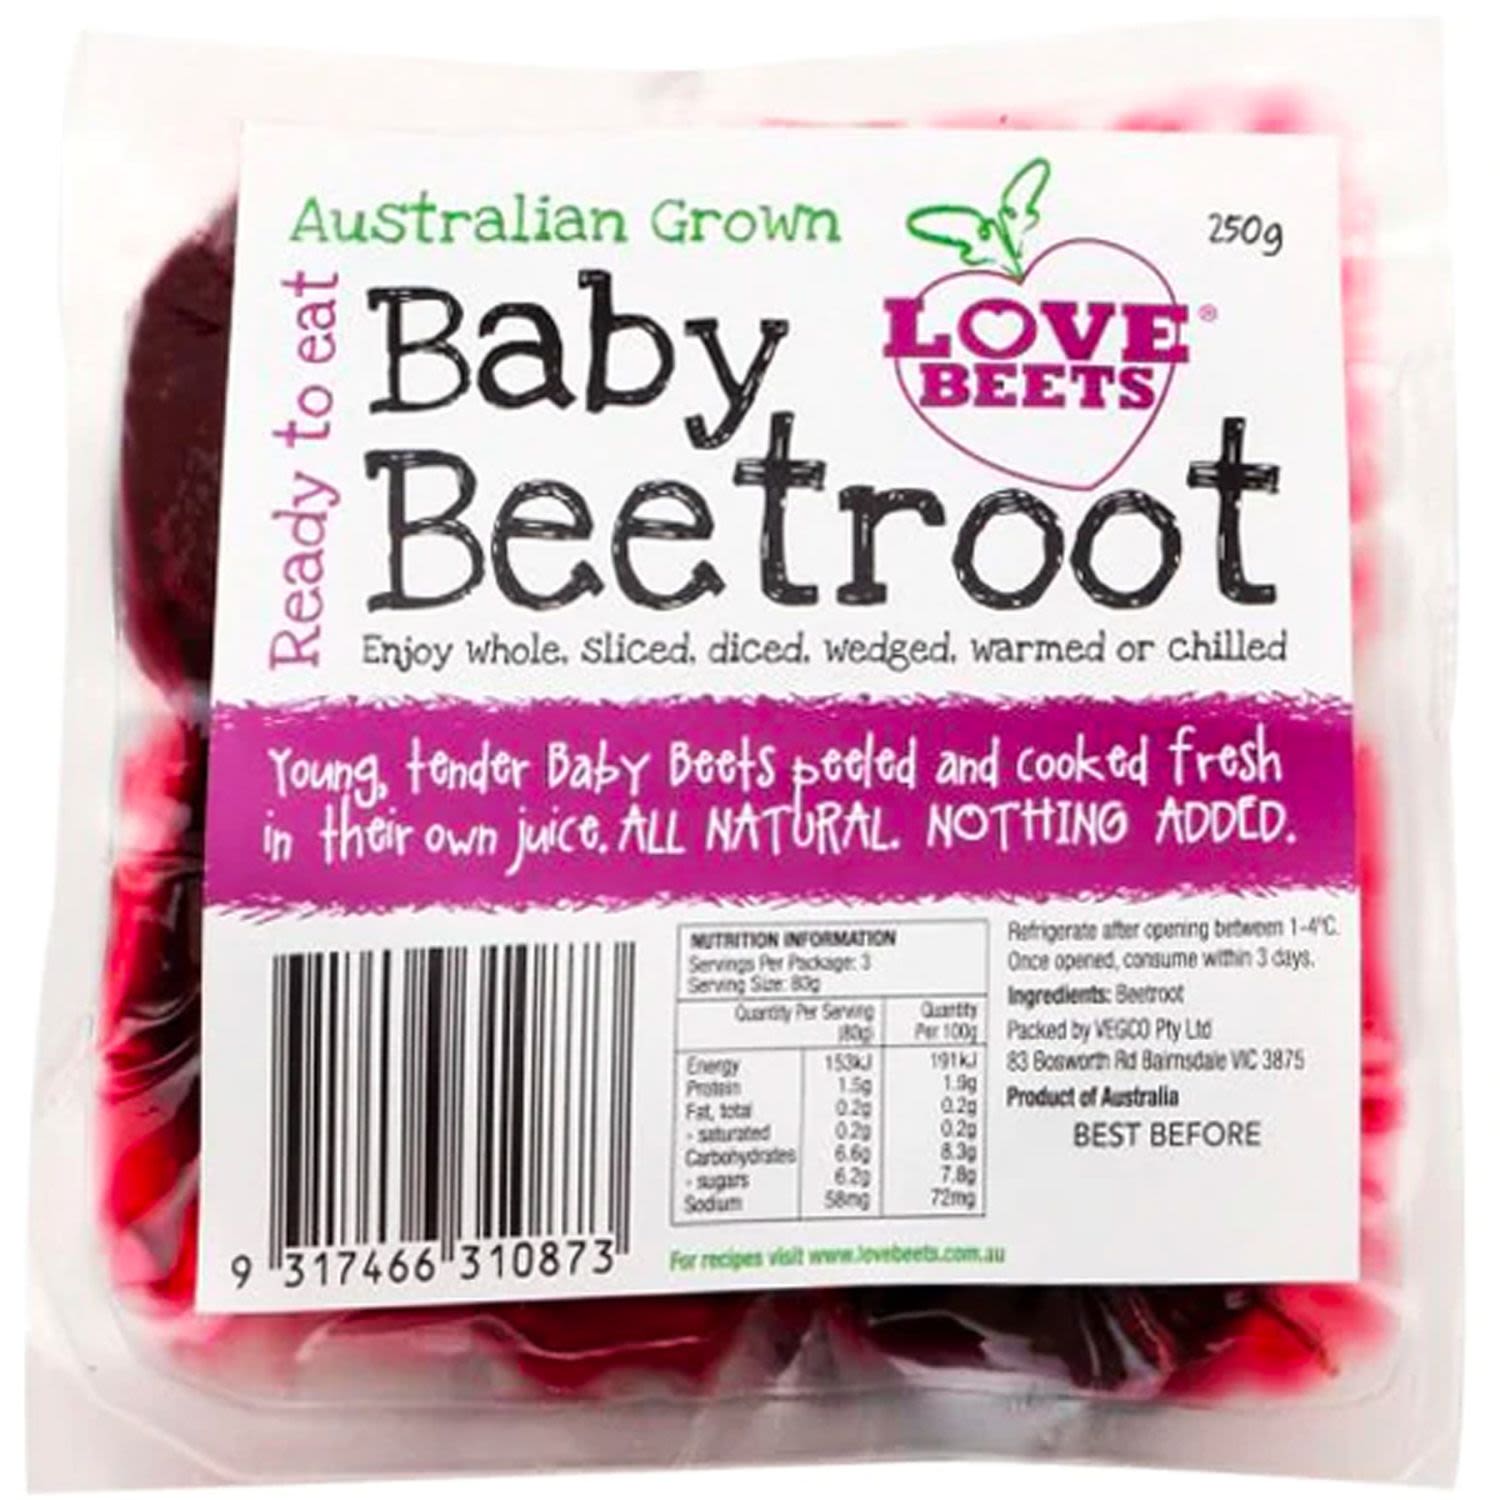 Love Beets Baby Beetroot Peeled and Cooked, 250 Gram